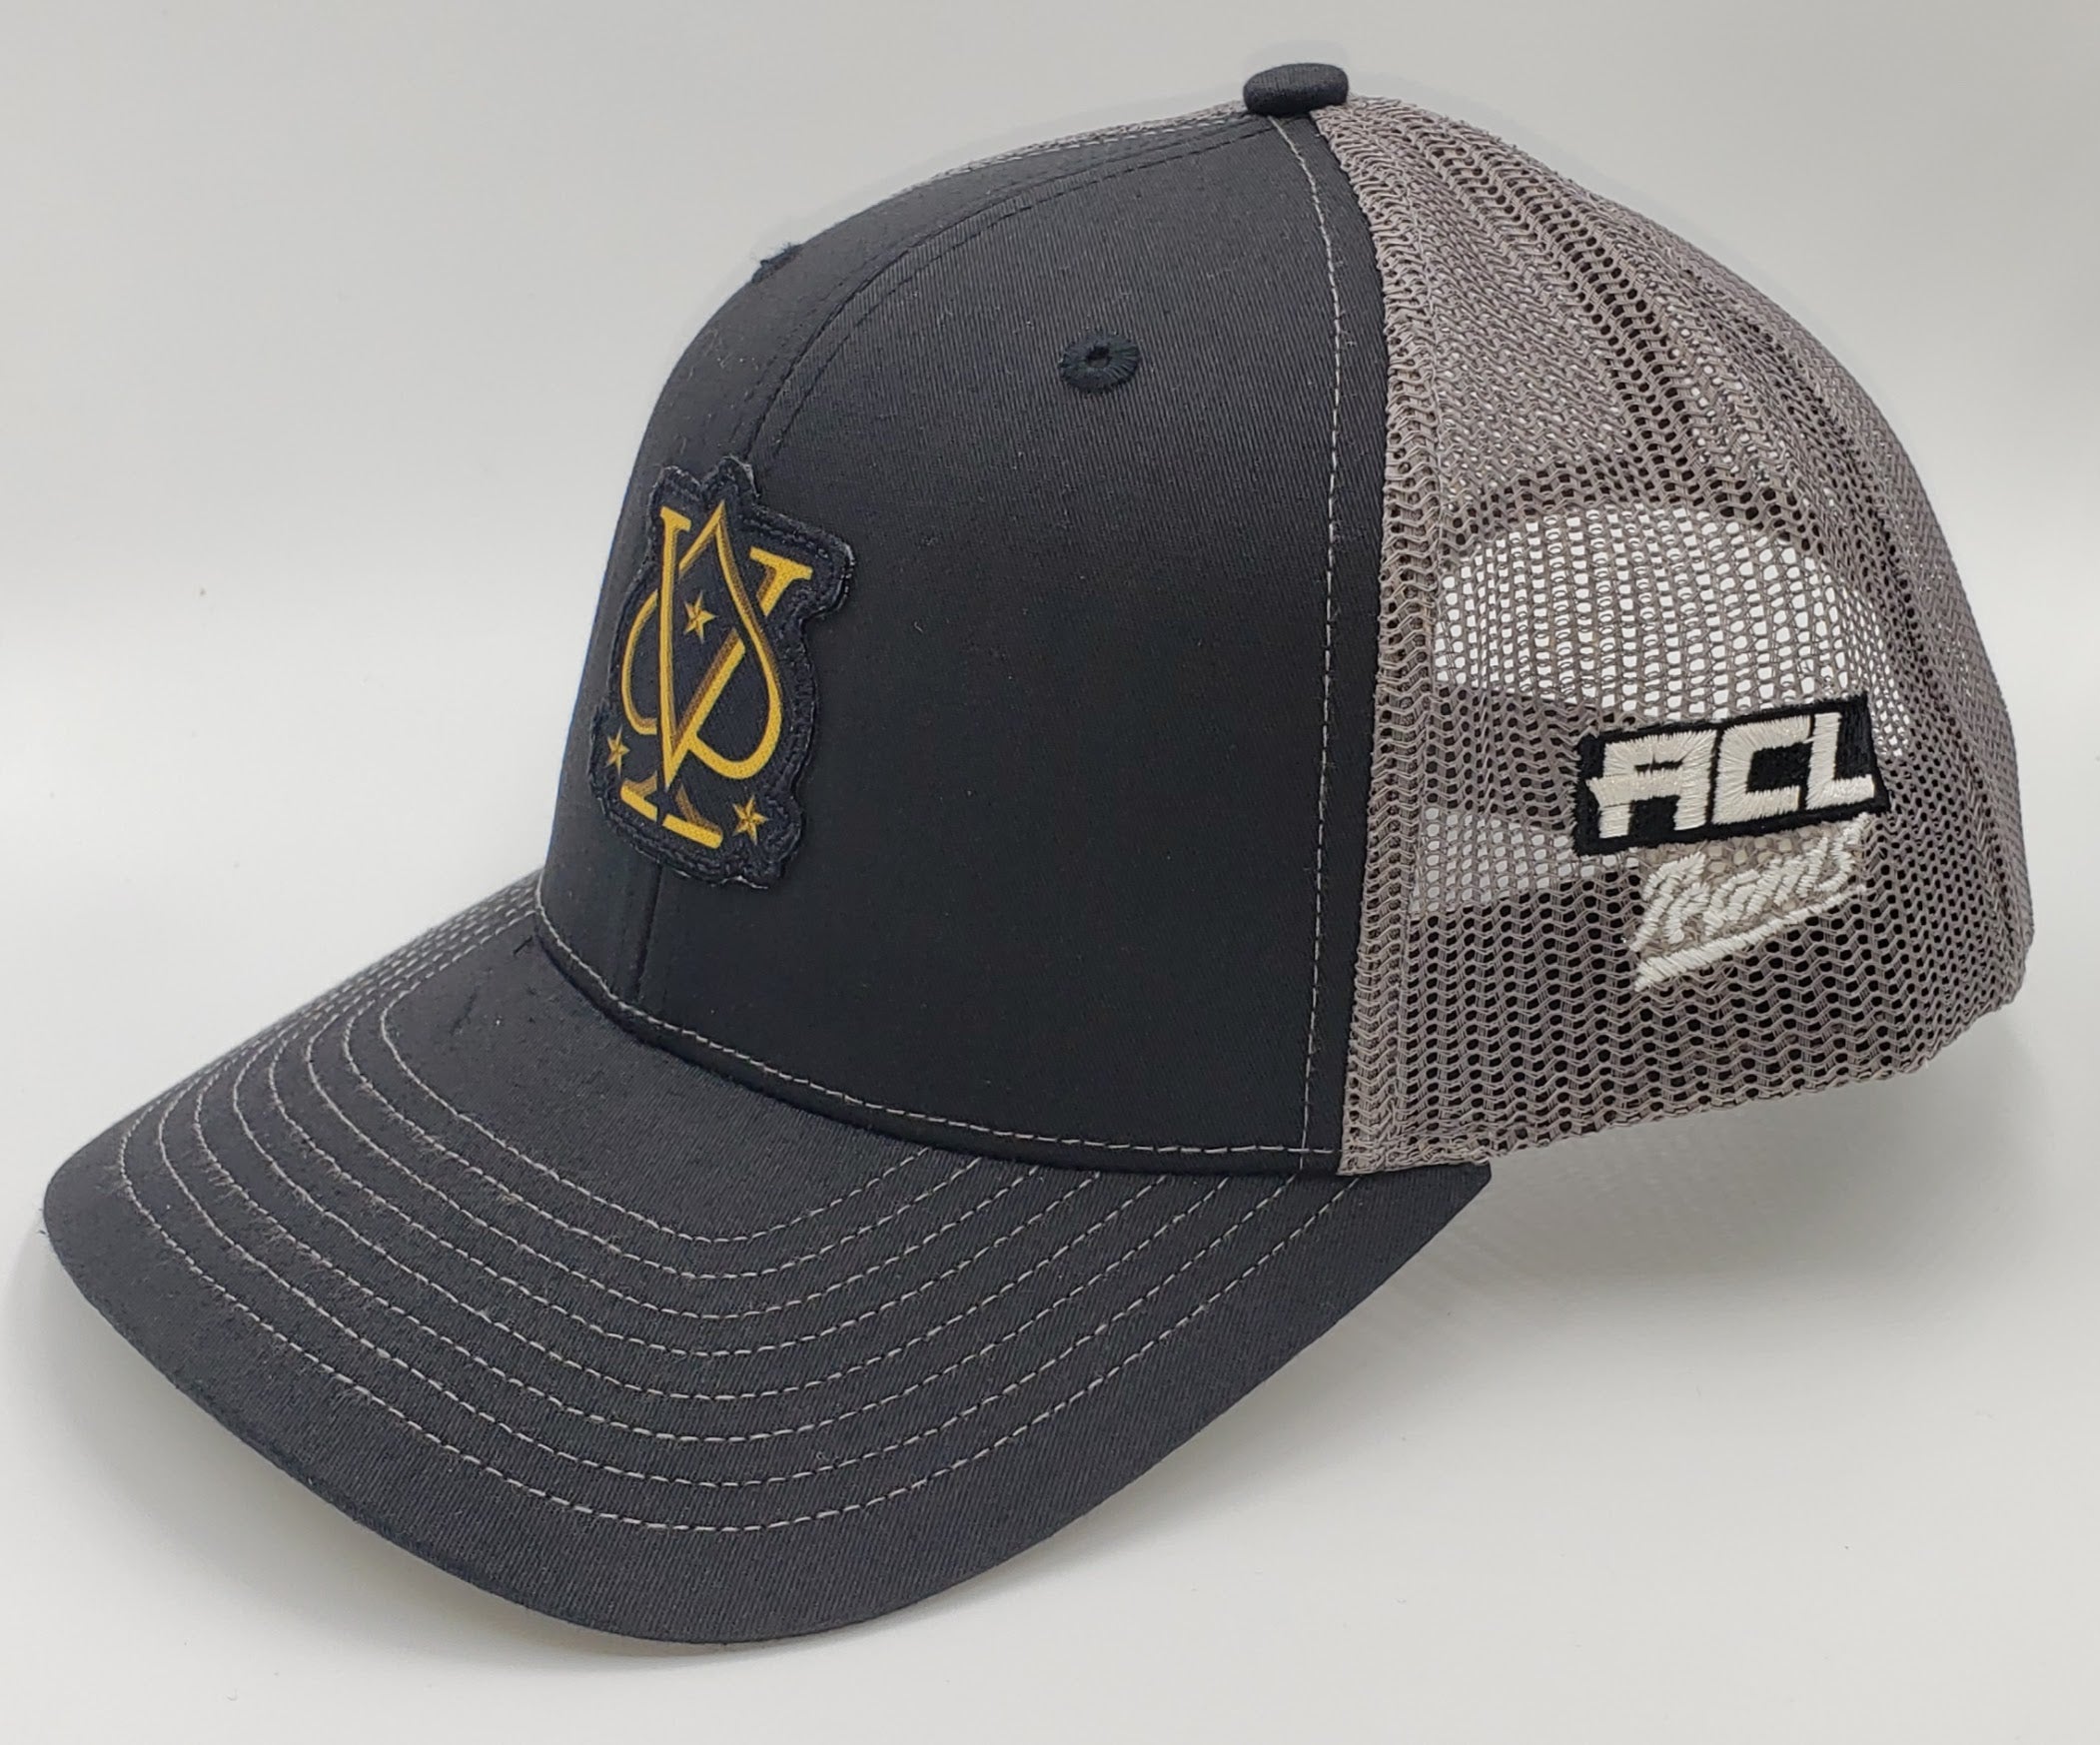 ACL Teams Hats - Vegas High Rollers